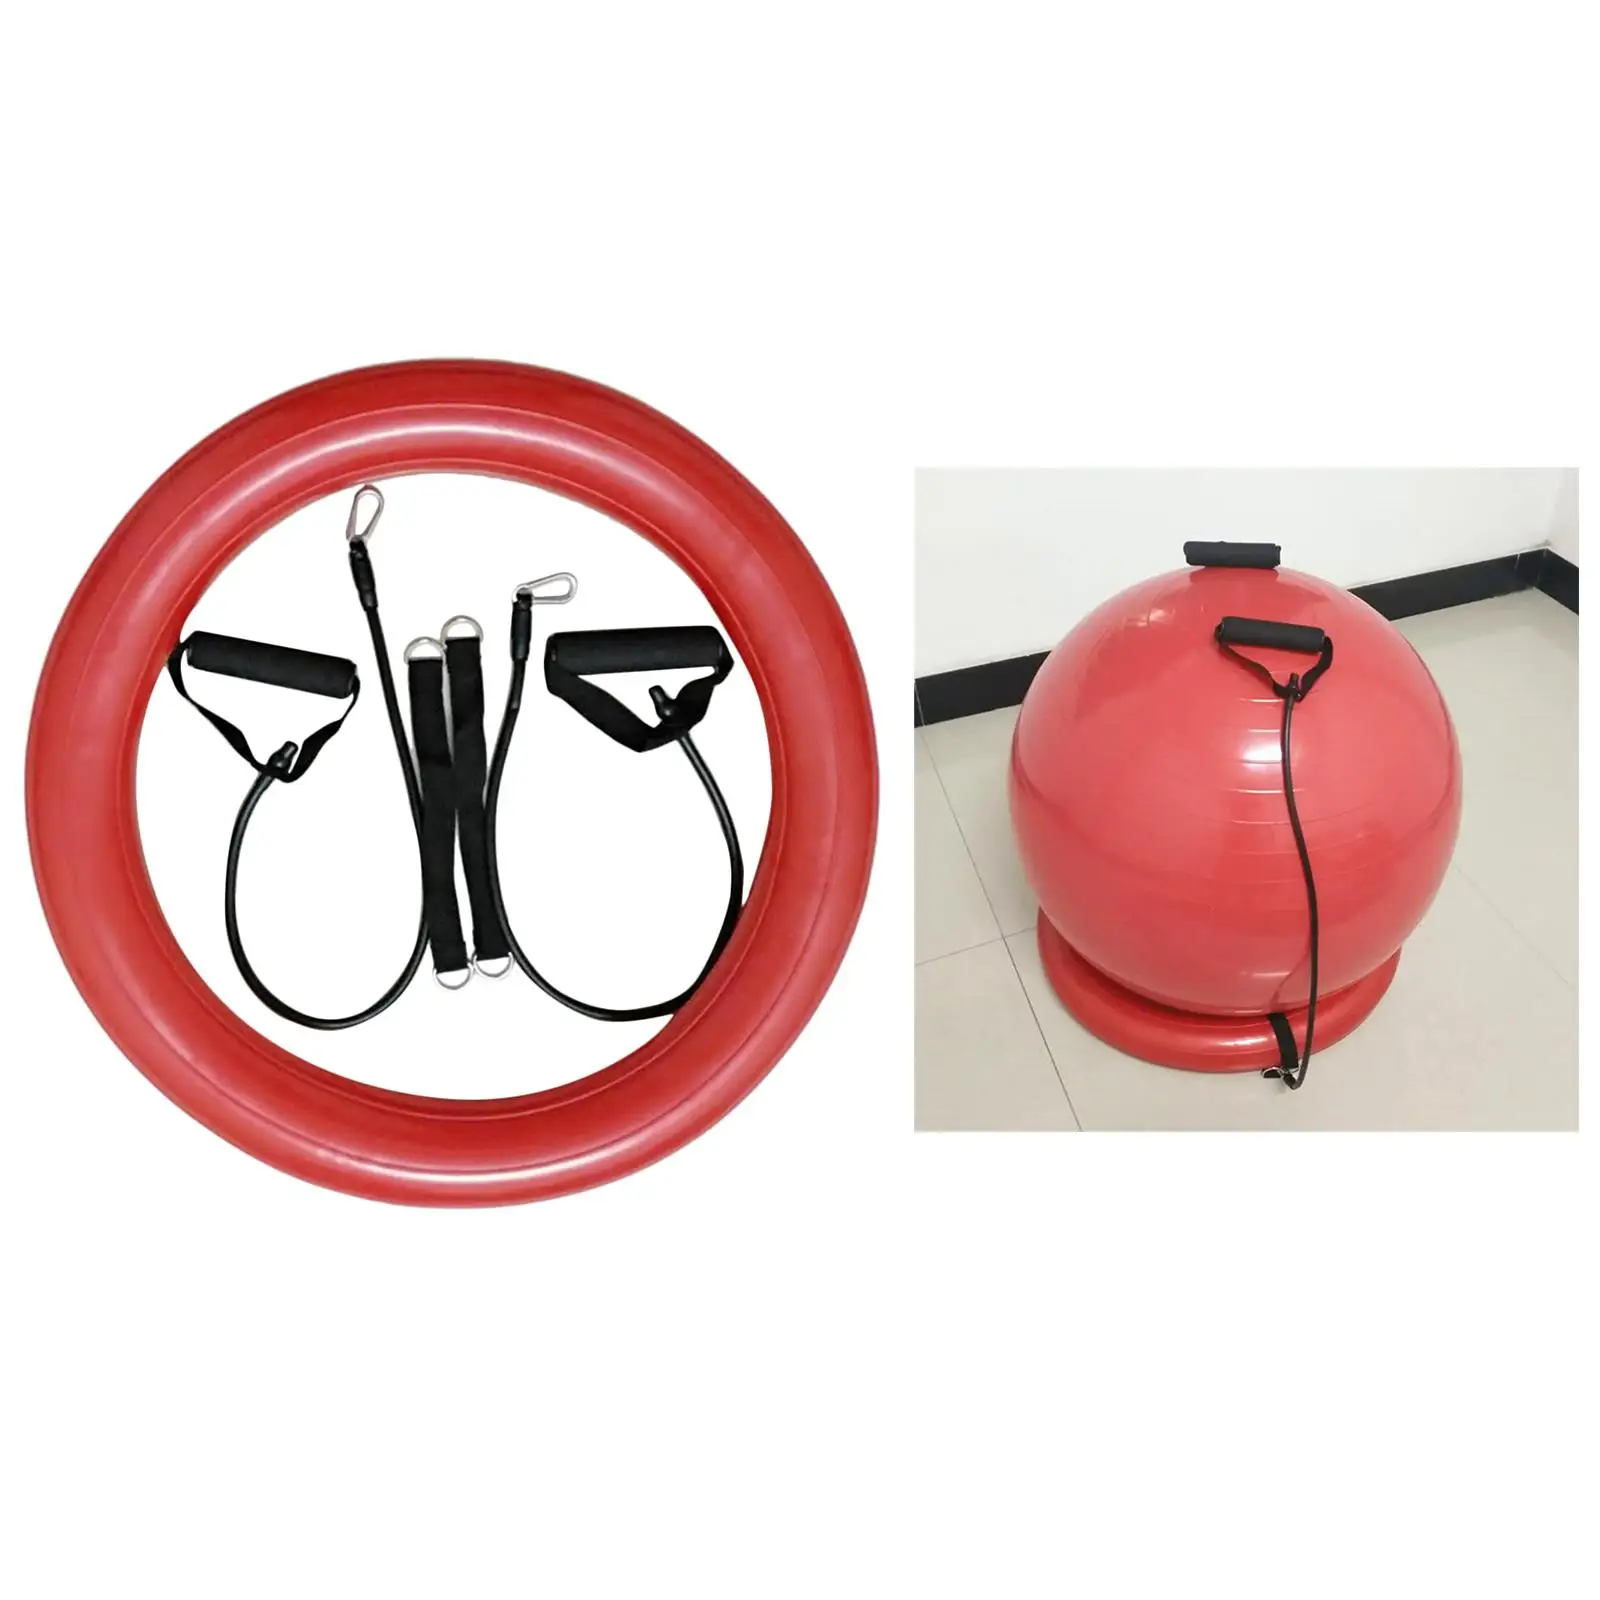 65/75cm Yoga Exercise Ball Stability Ring Inflatable Ball Chair Stand Holder